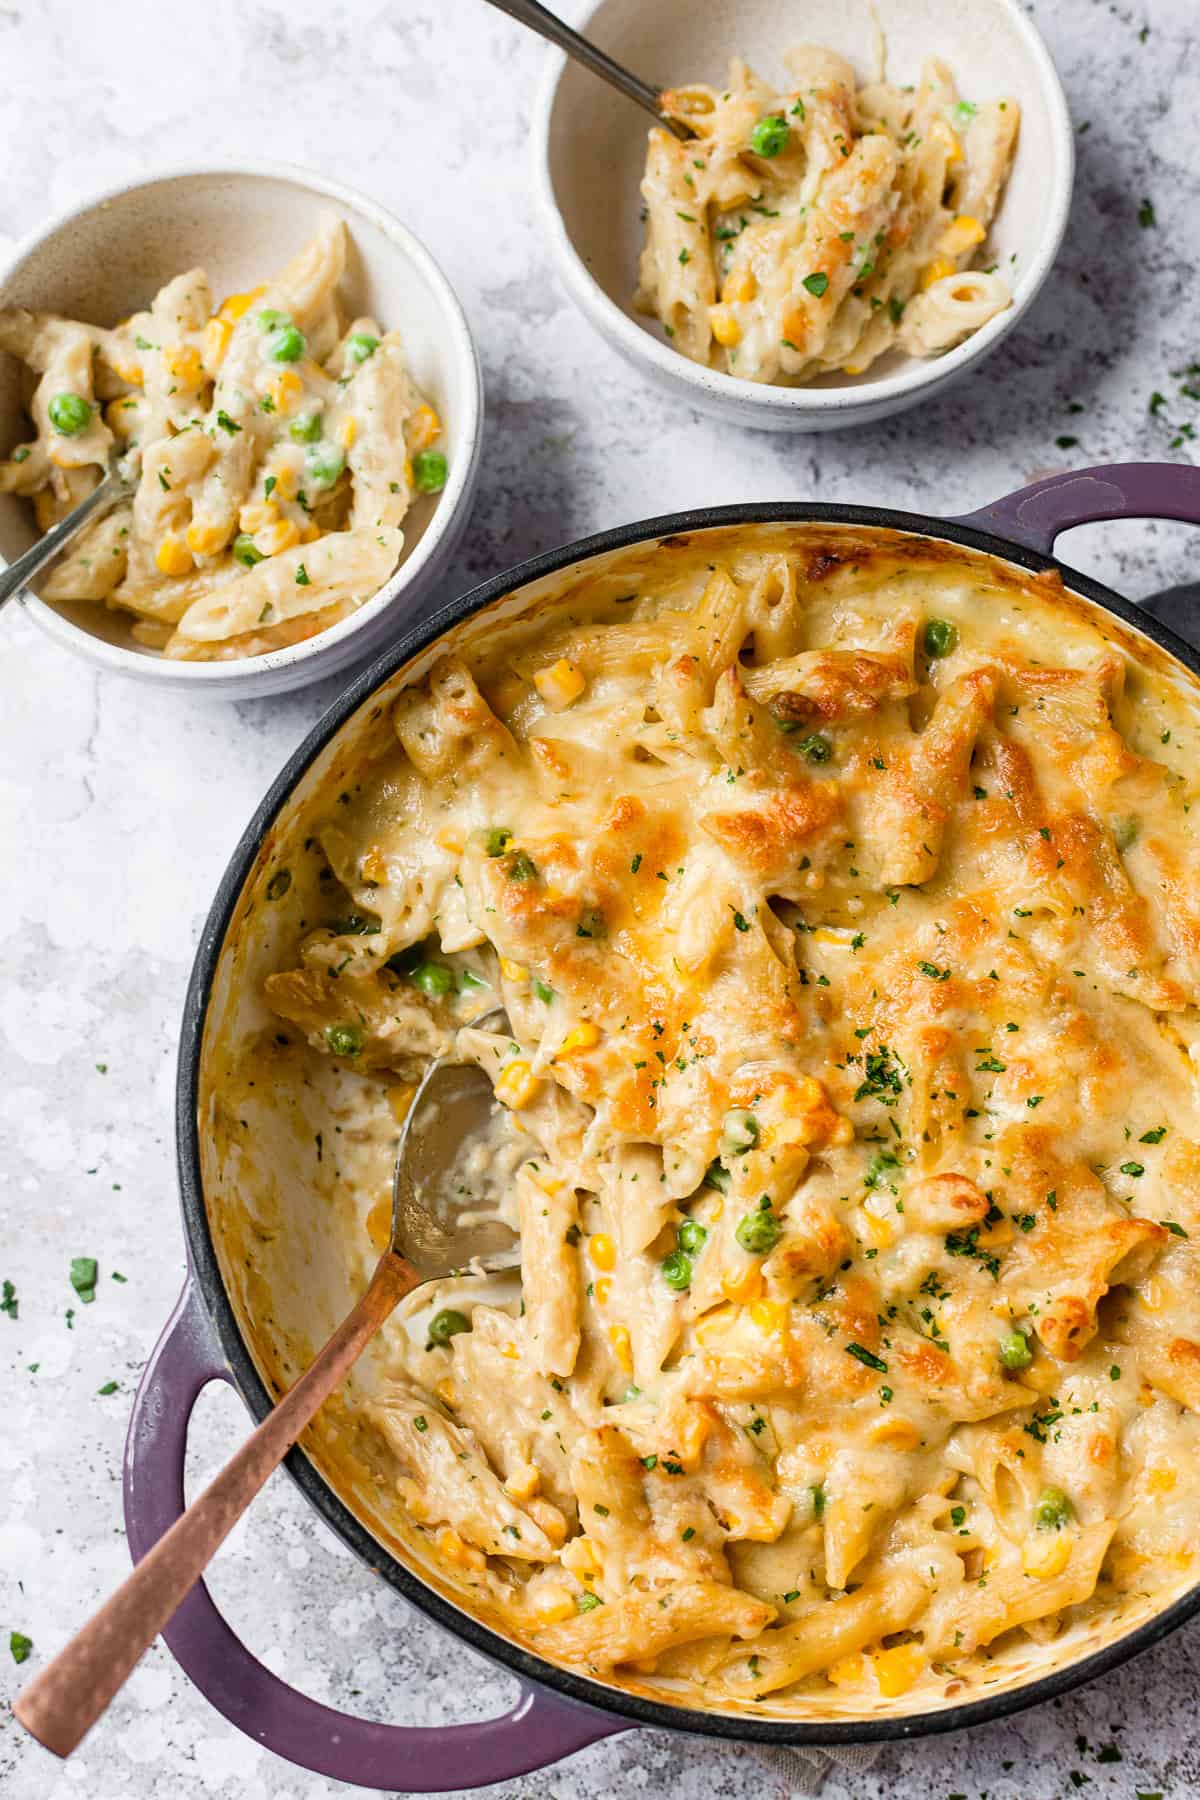 Healthy tuna pasta bake in a casserole dish with a spoon.